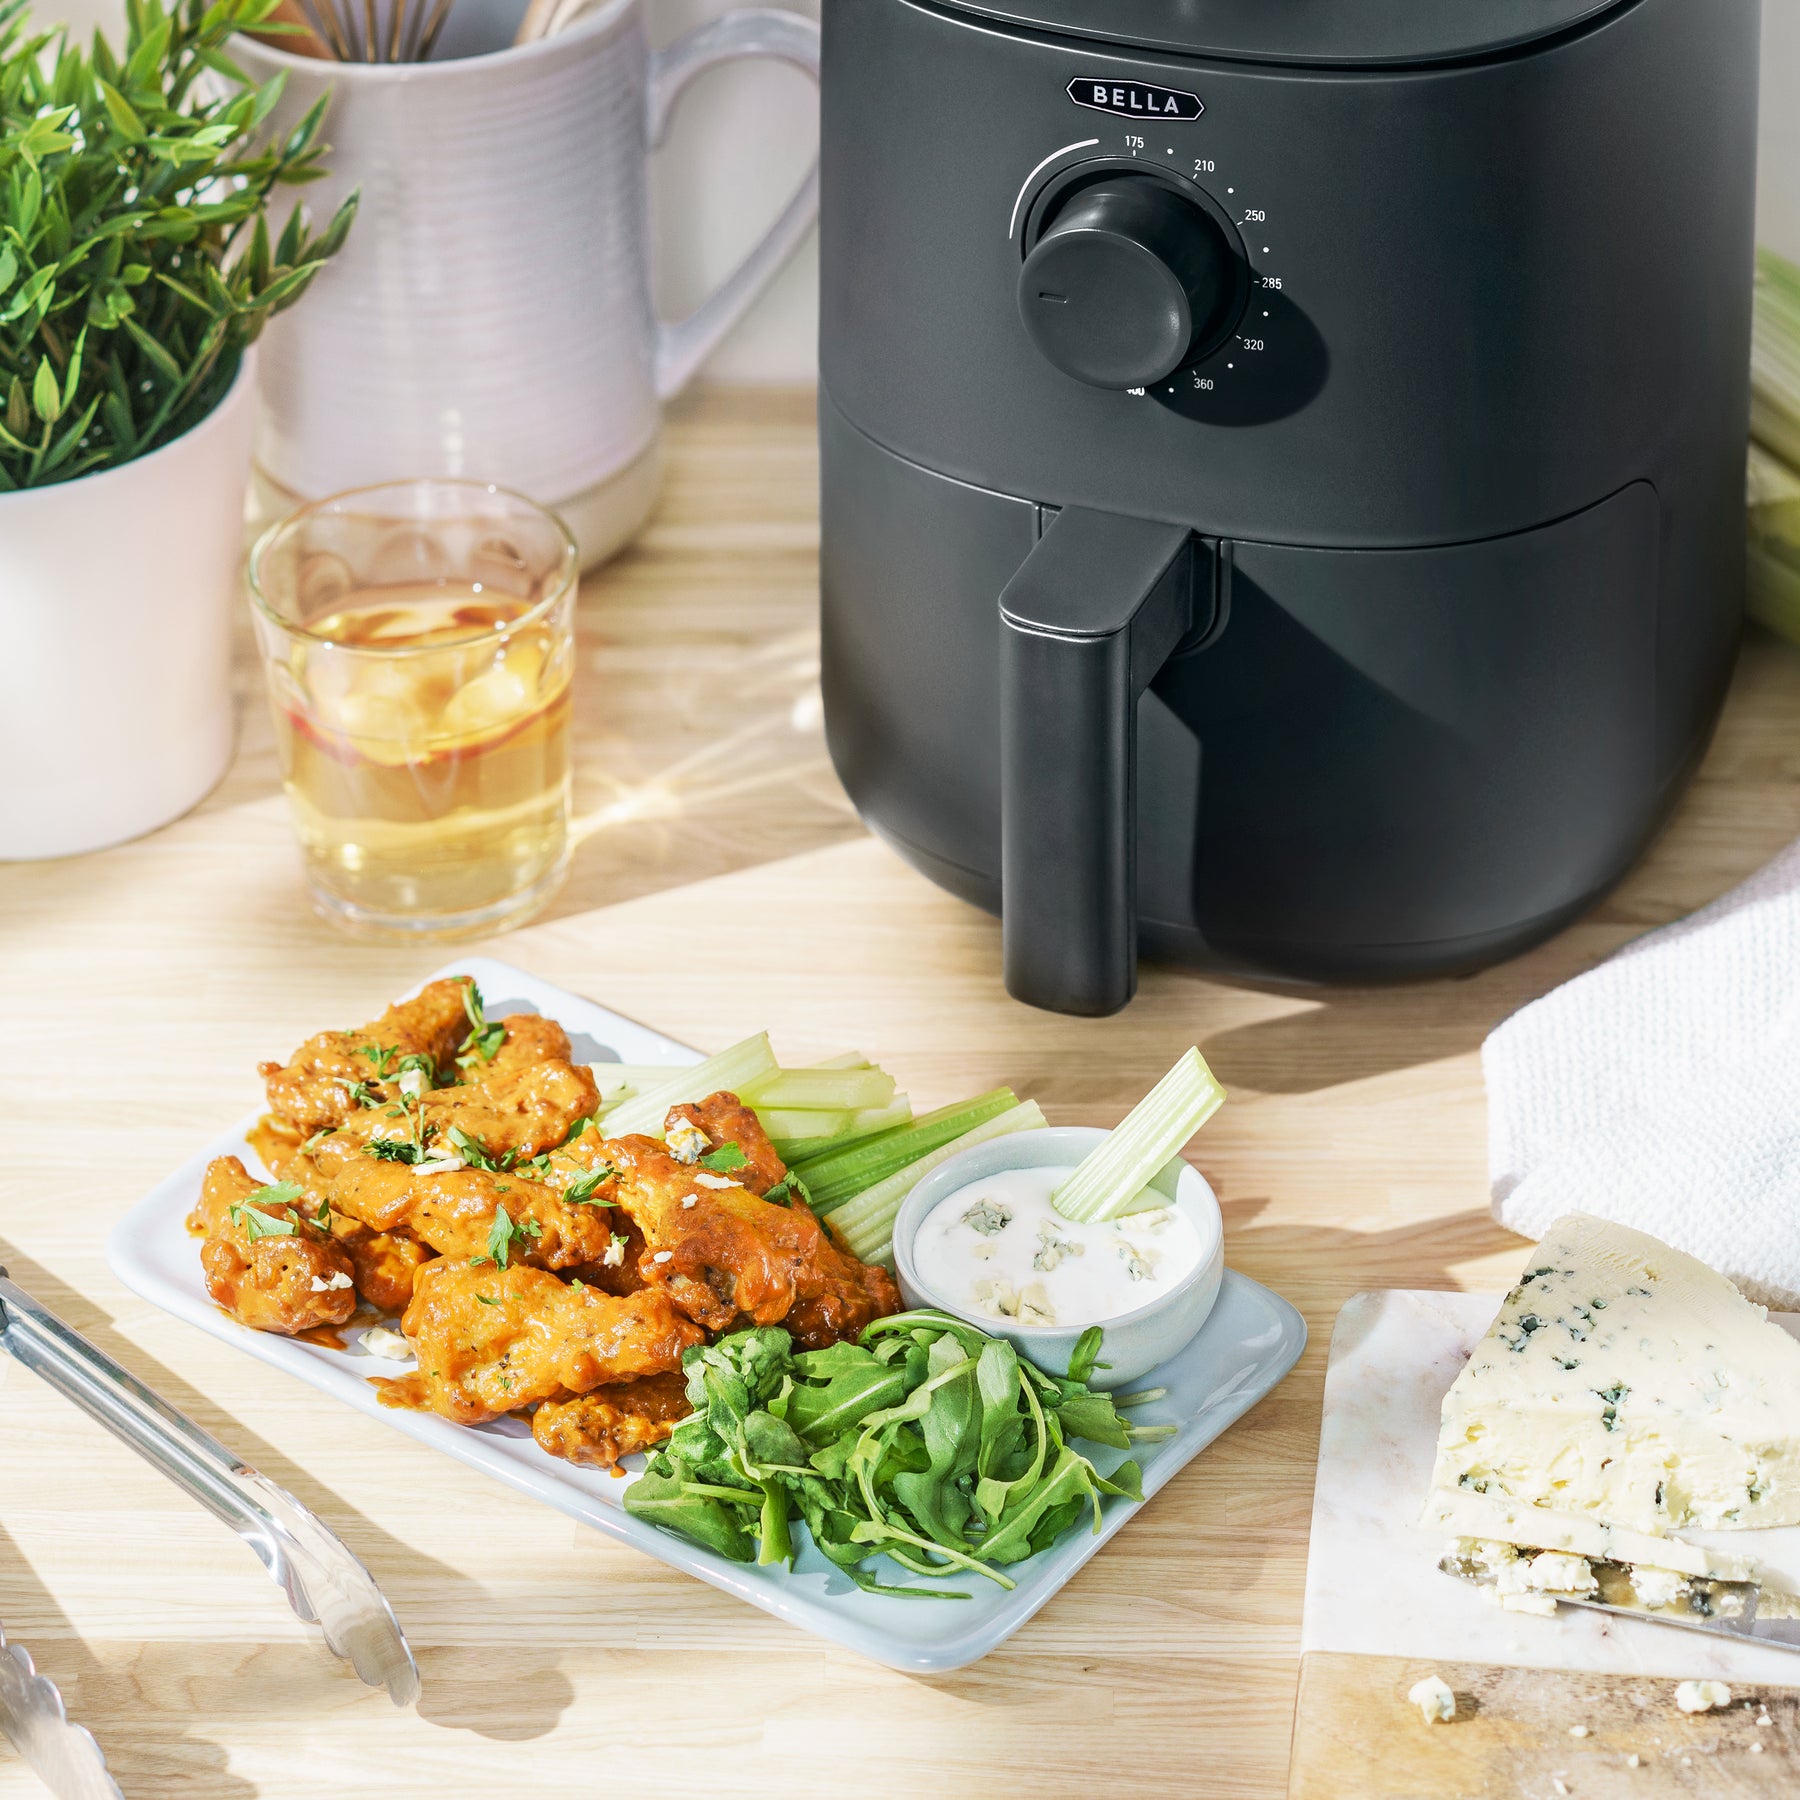 Bella 17275 Air Fryer Review - Consumer Reports